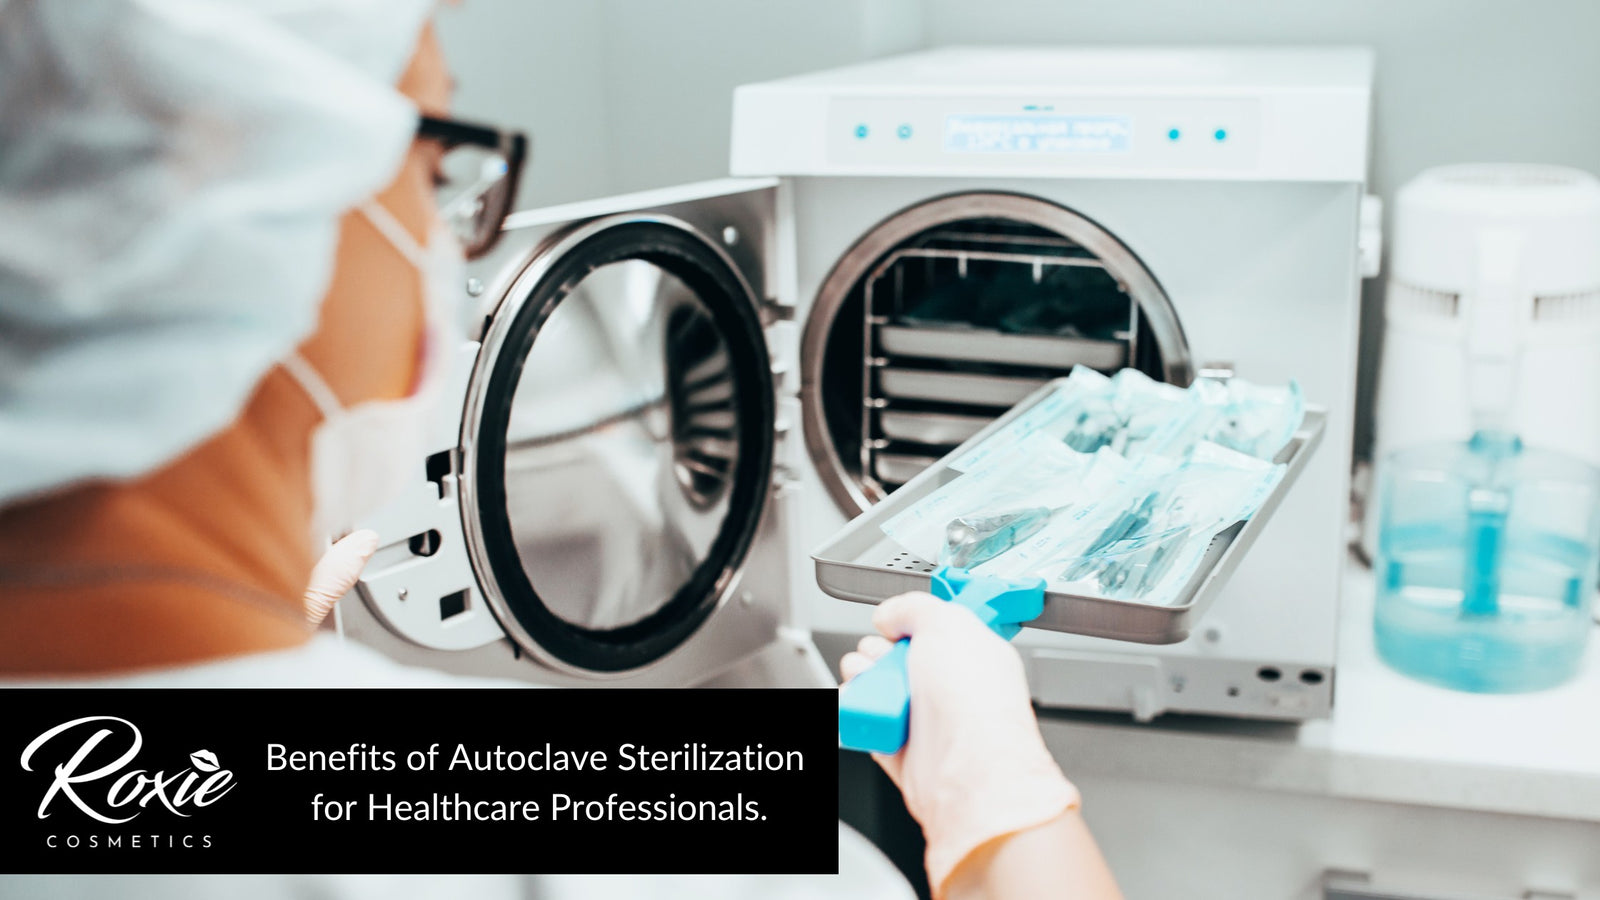 The Benefits of Autoclave Sterilization for Healthcare Professionals